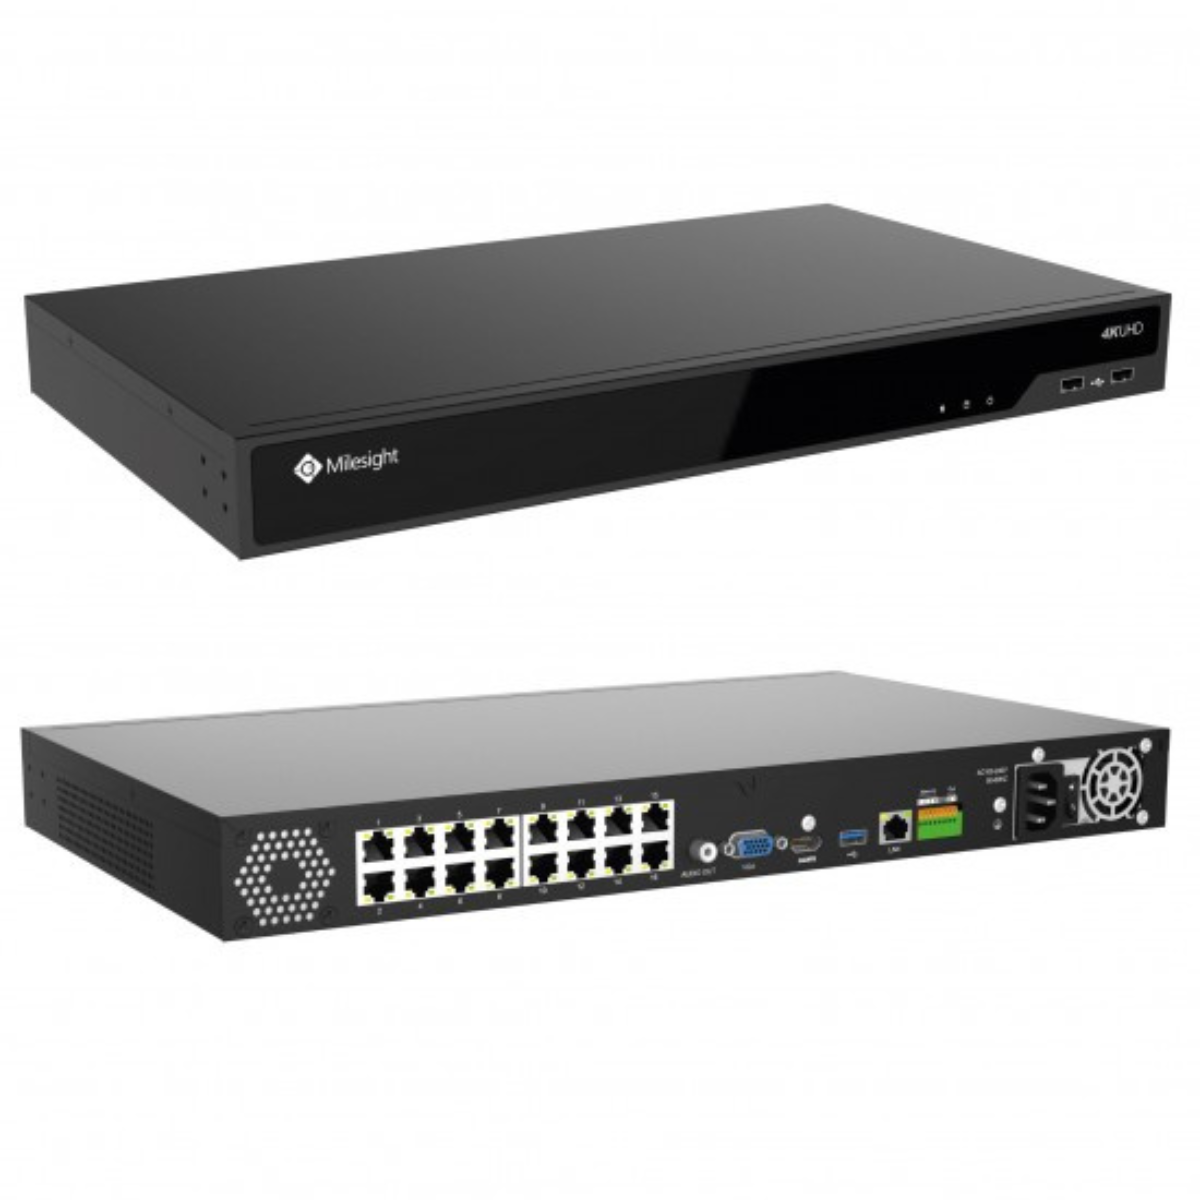 High-Performance 16-Channel PRO NVR with 20TB Storage Capacity and RJ45 Connectivity